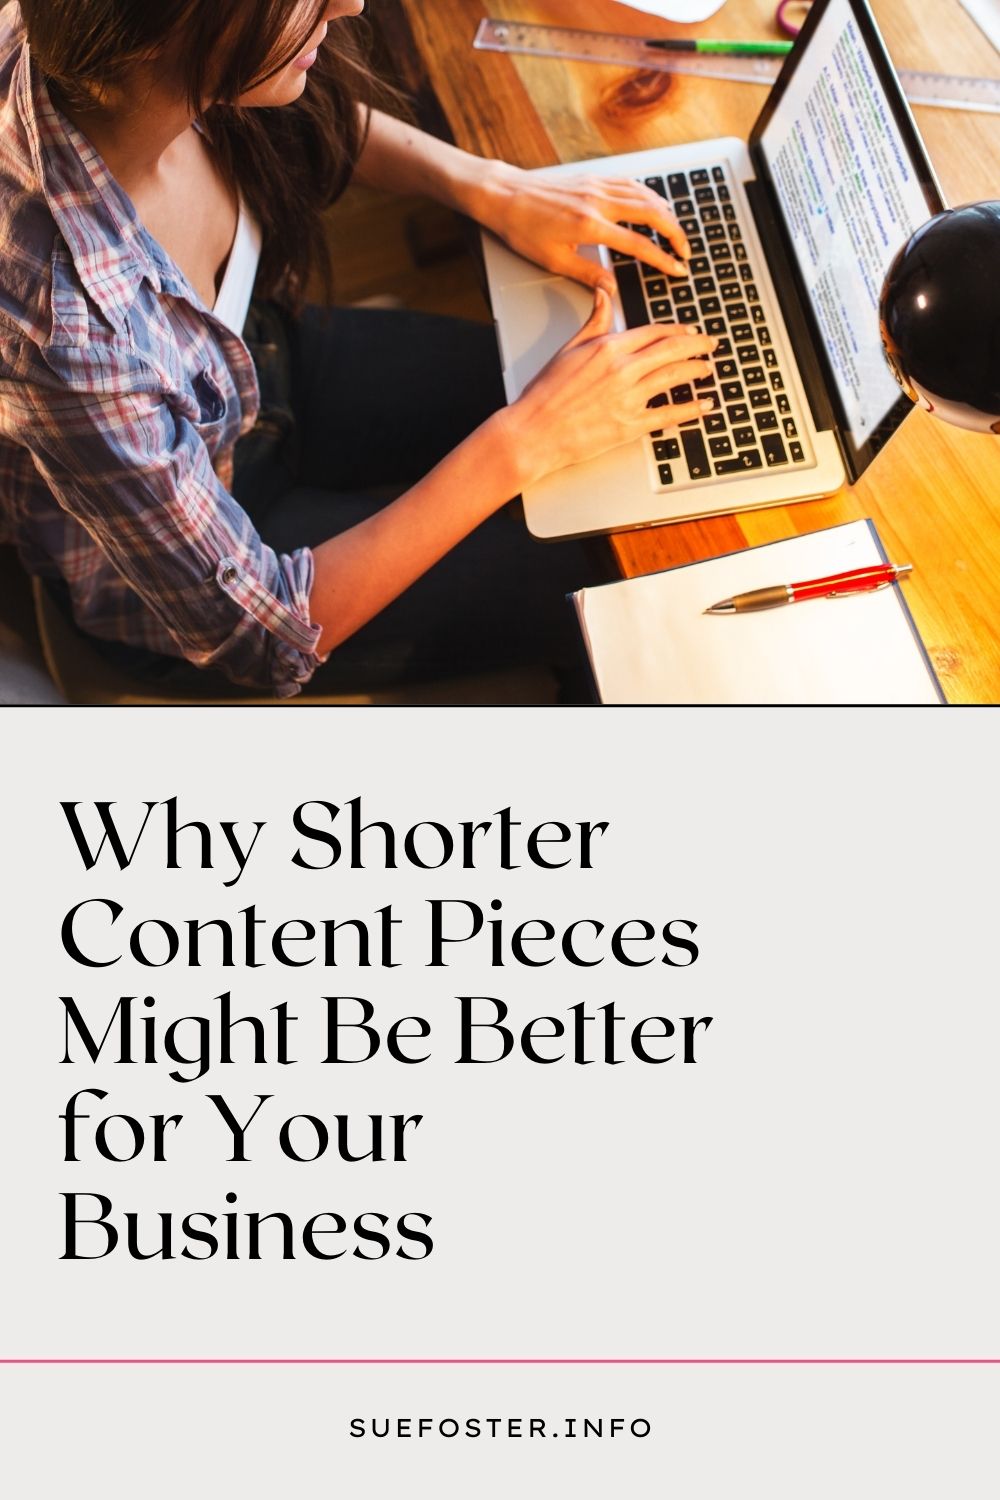 Let's look into why shorter content pieces might be better for Your business.